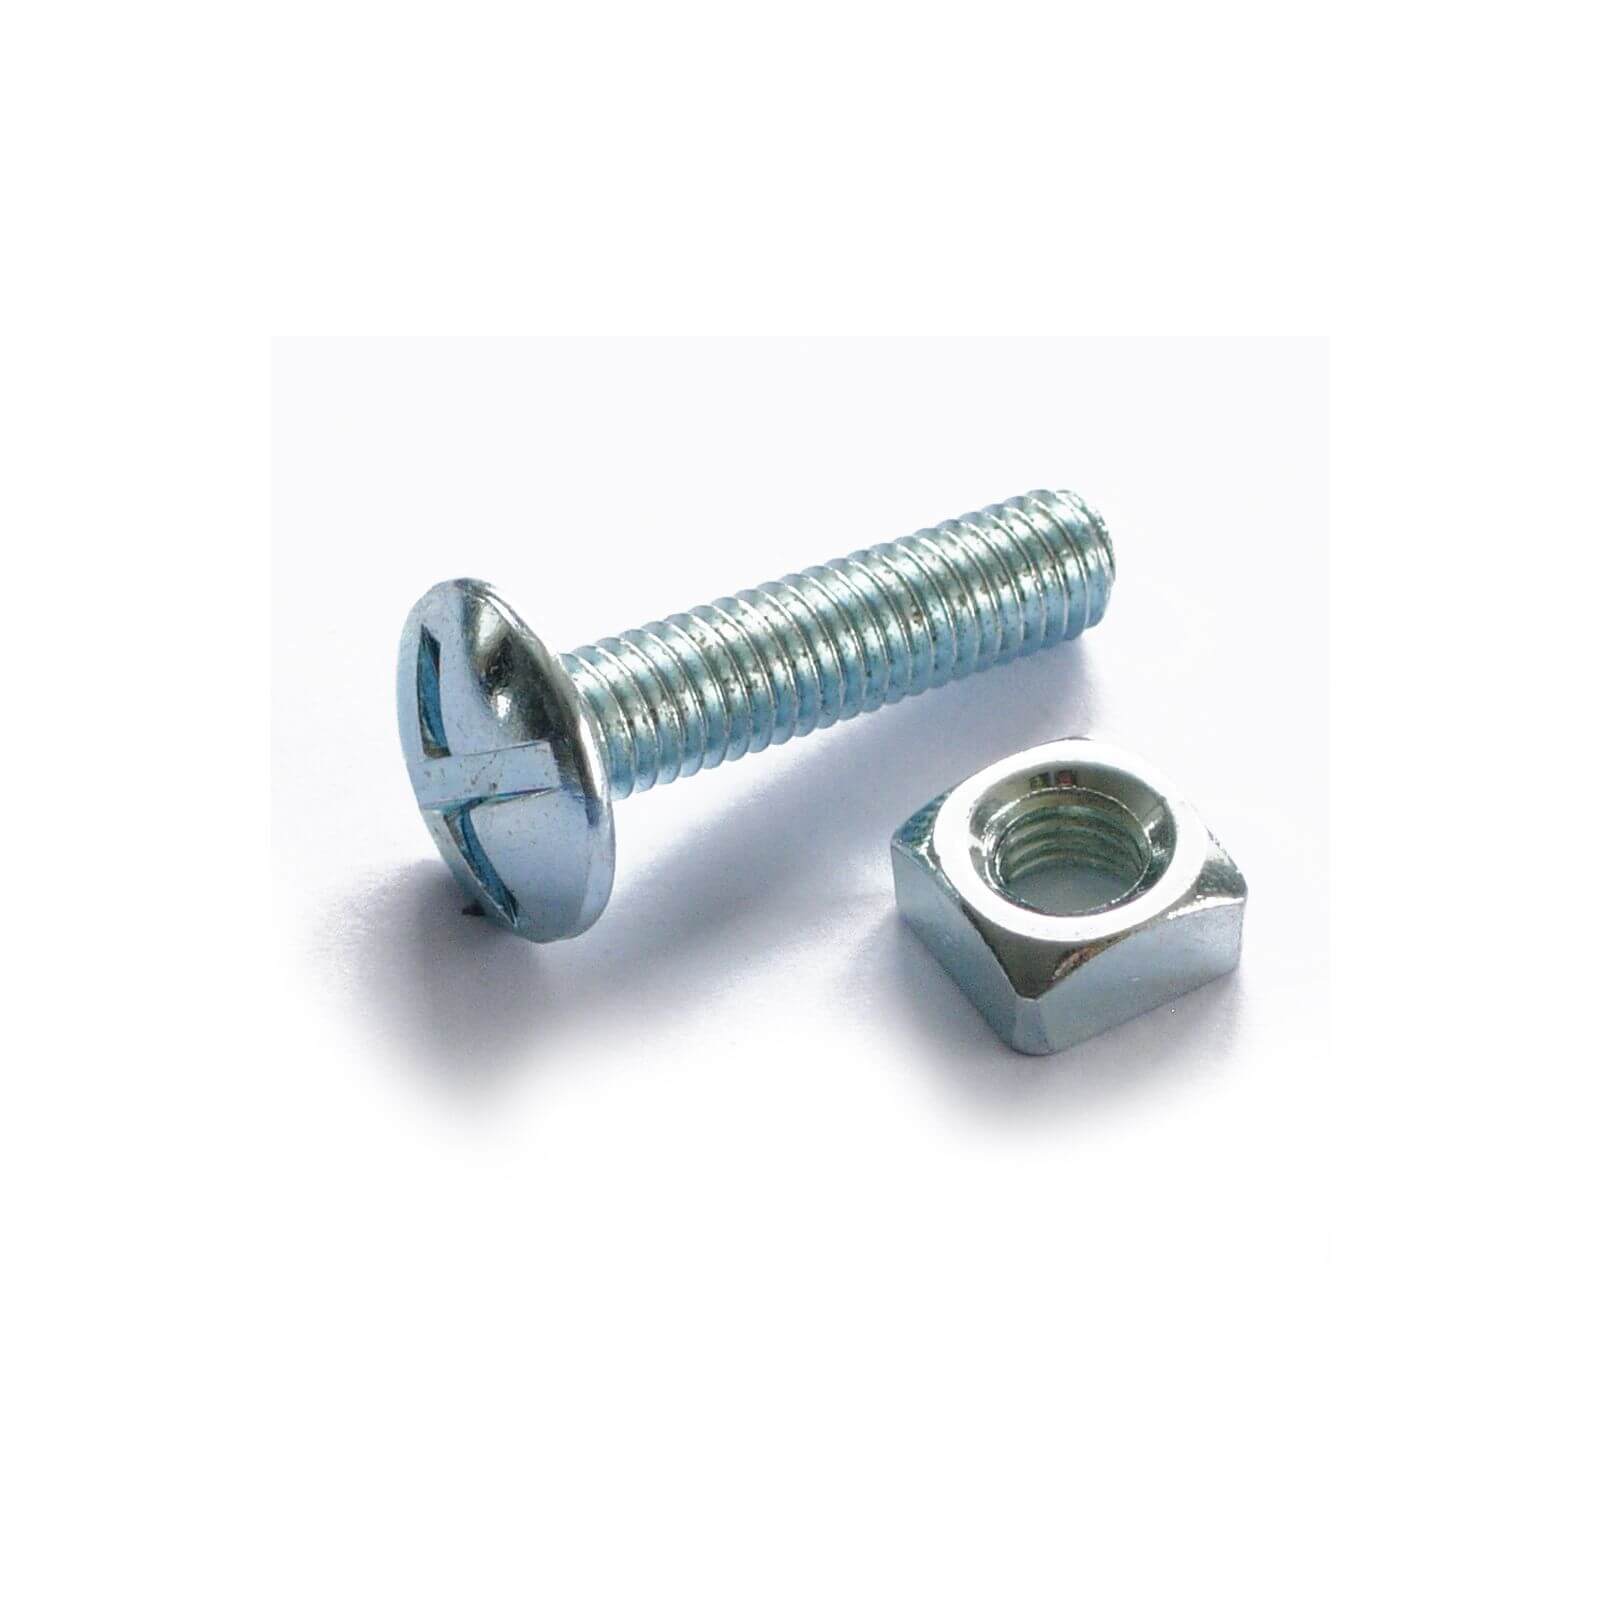 Roofing Bolt - Bright Zinc Plated - M6 80mm - 5 Pack